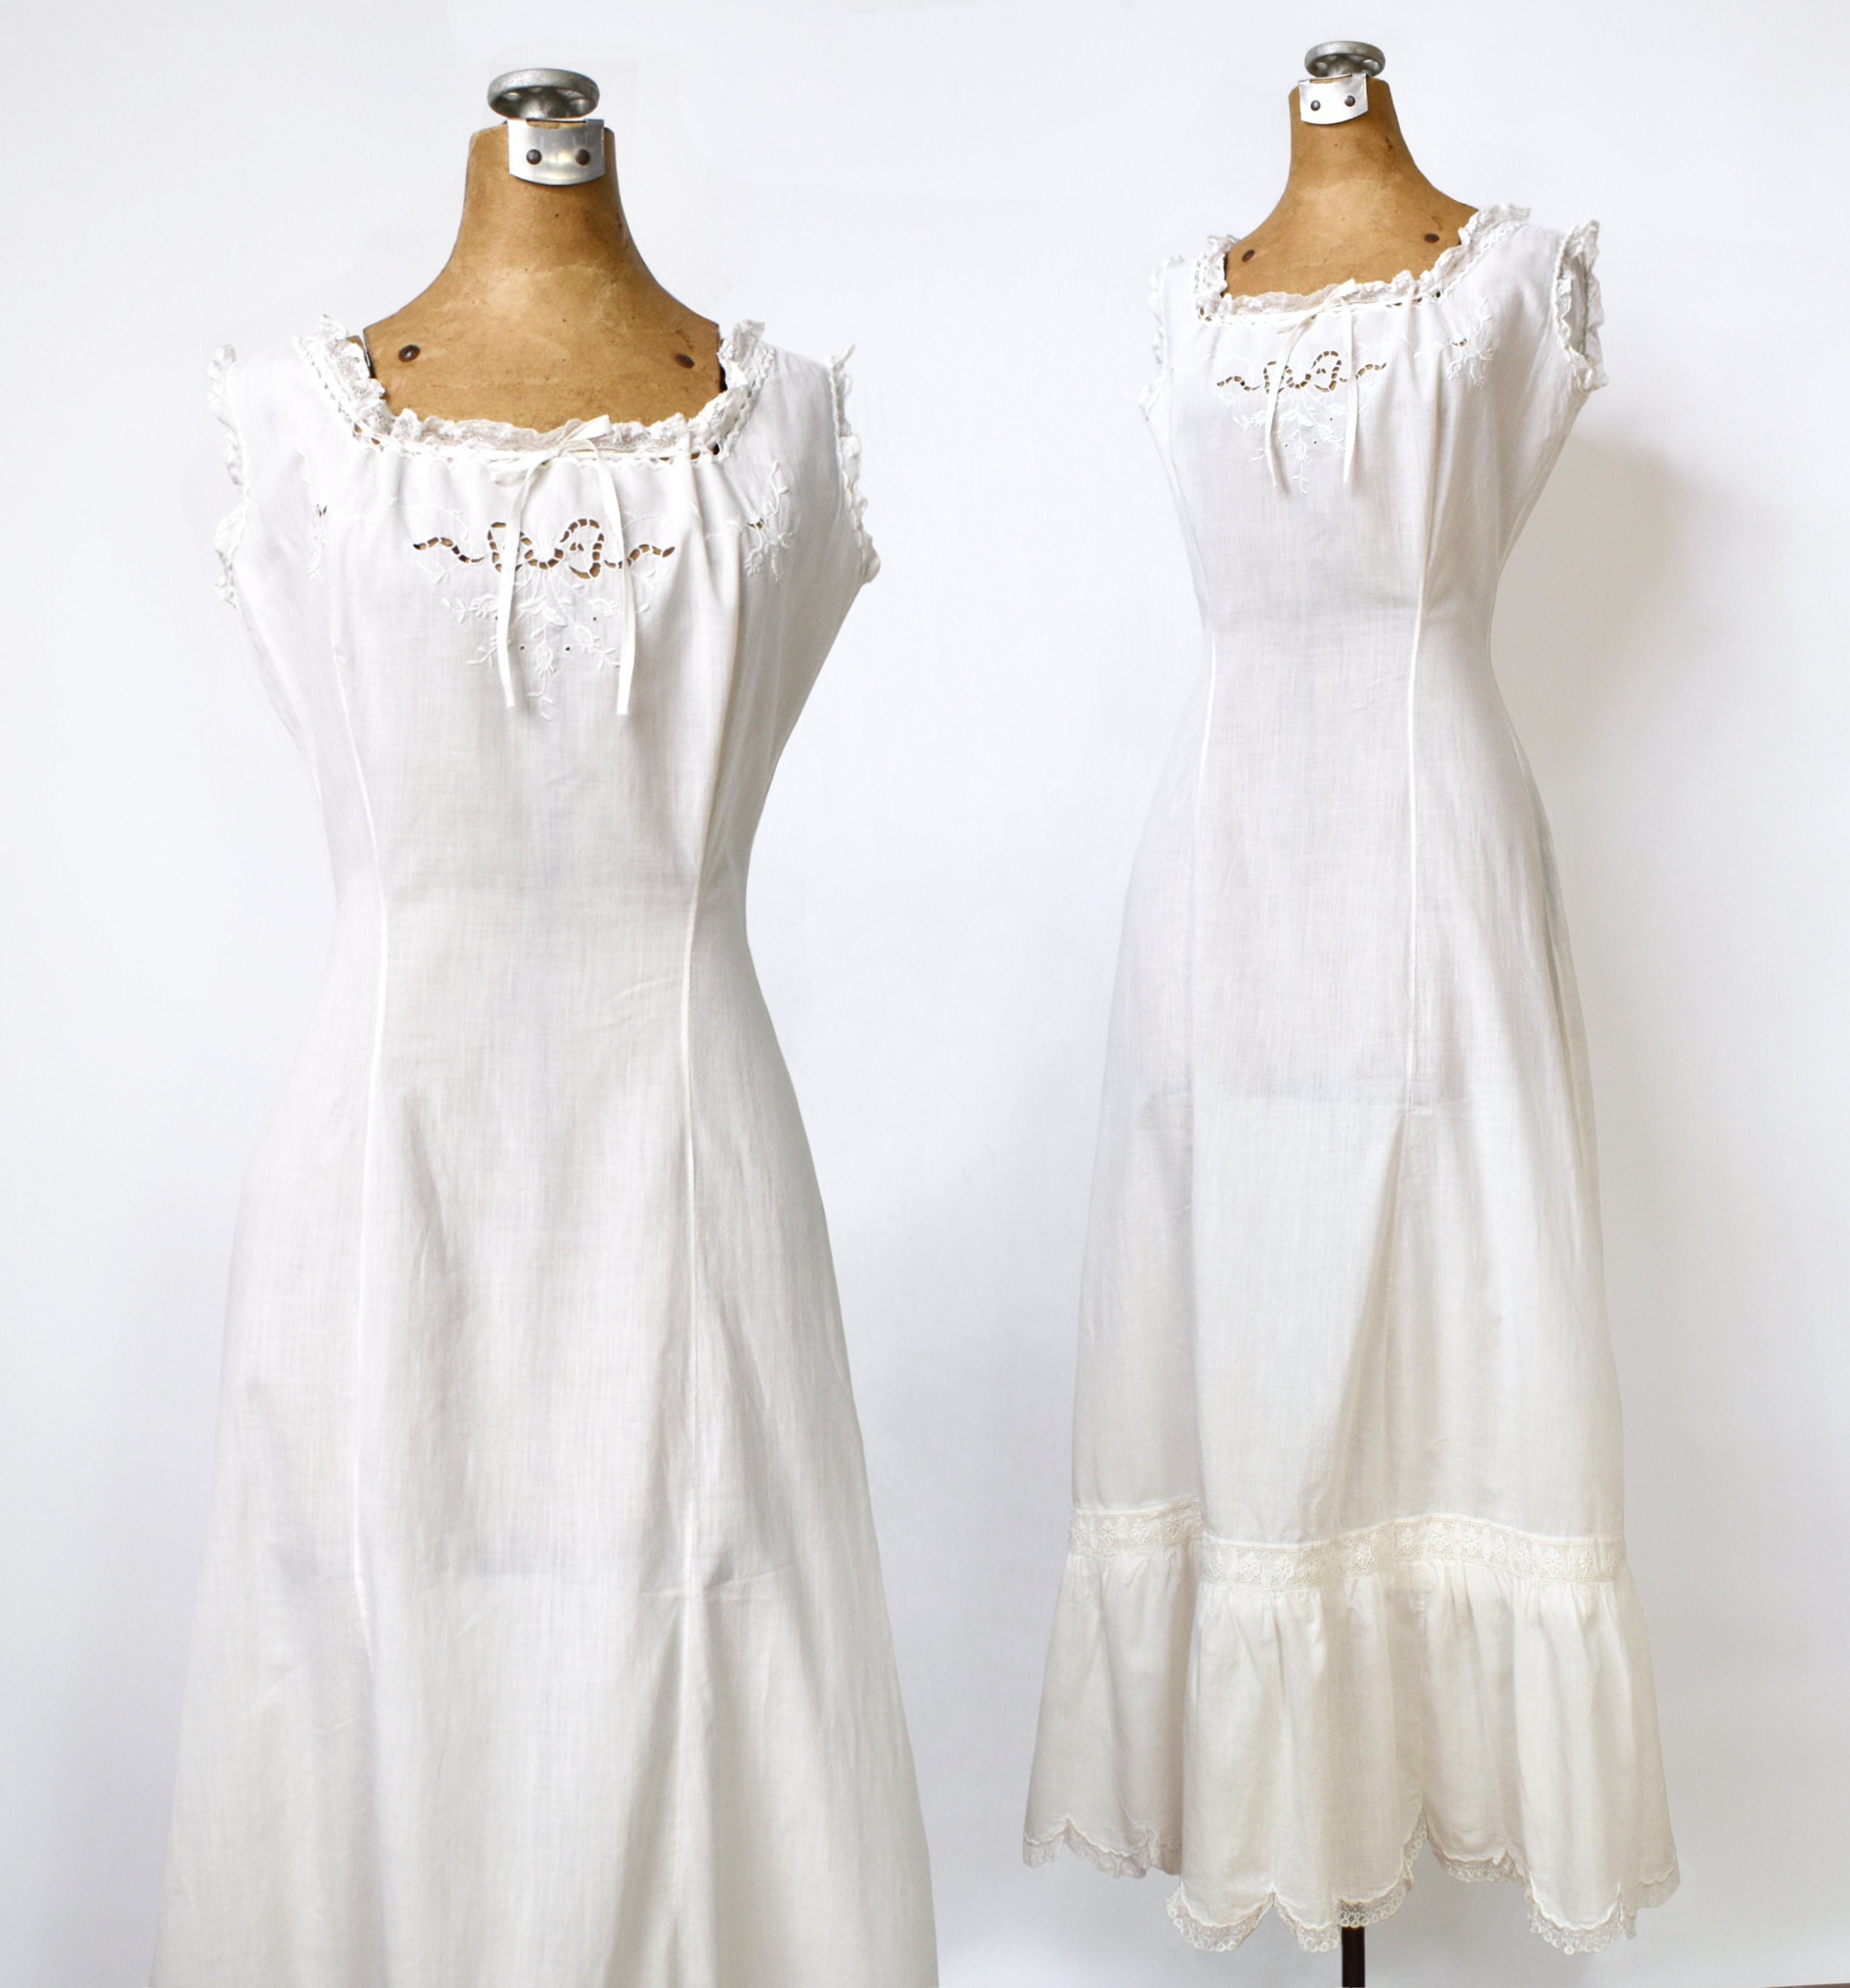 Antique Slip Padded Edwardian Camisole Button up Straps Knee Length Crochet  Lace Tatted Undergarment Dress Bustle Shape Wear Small M Cotton 